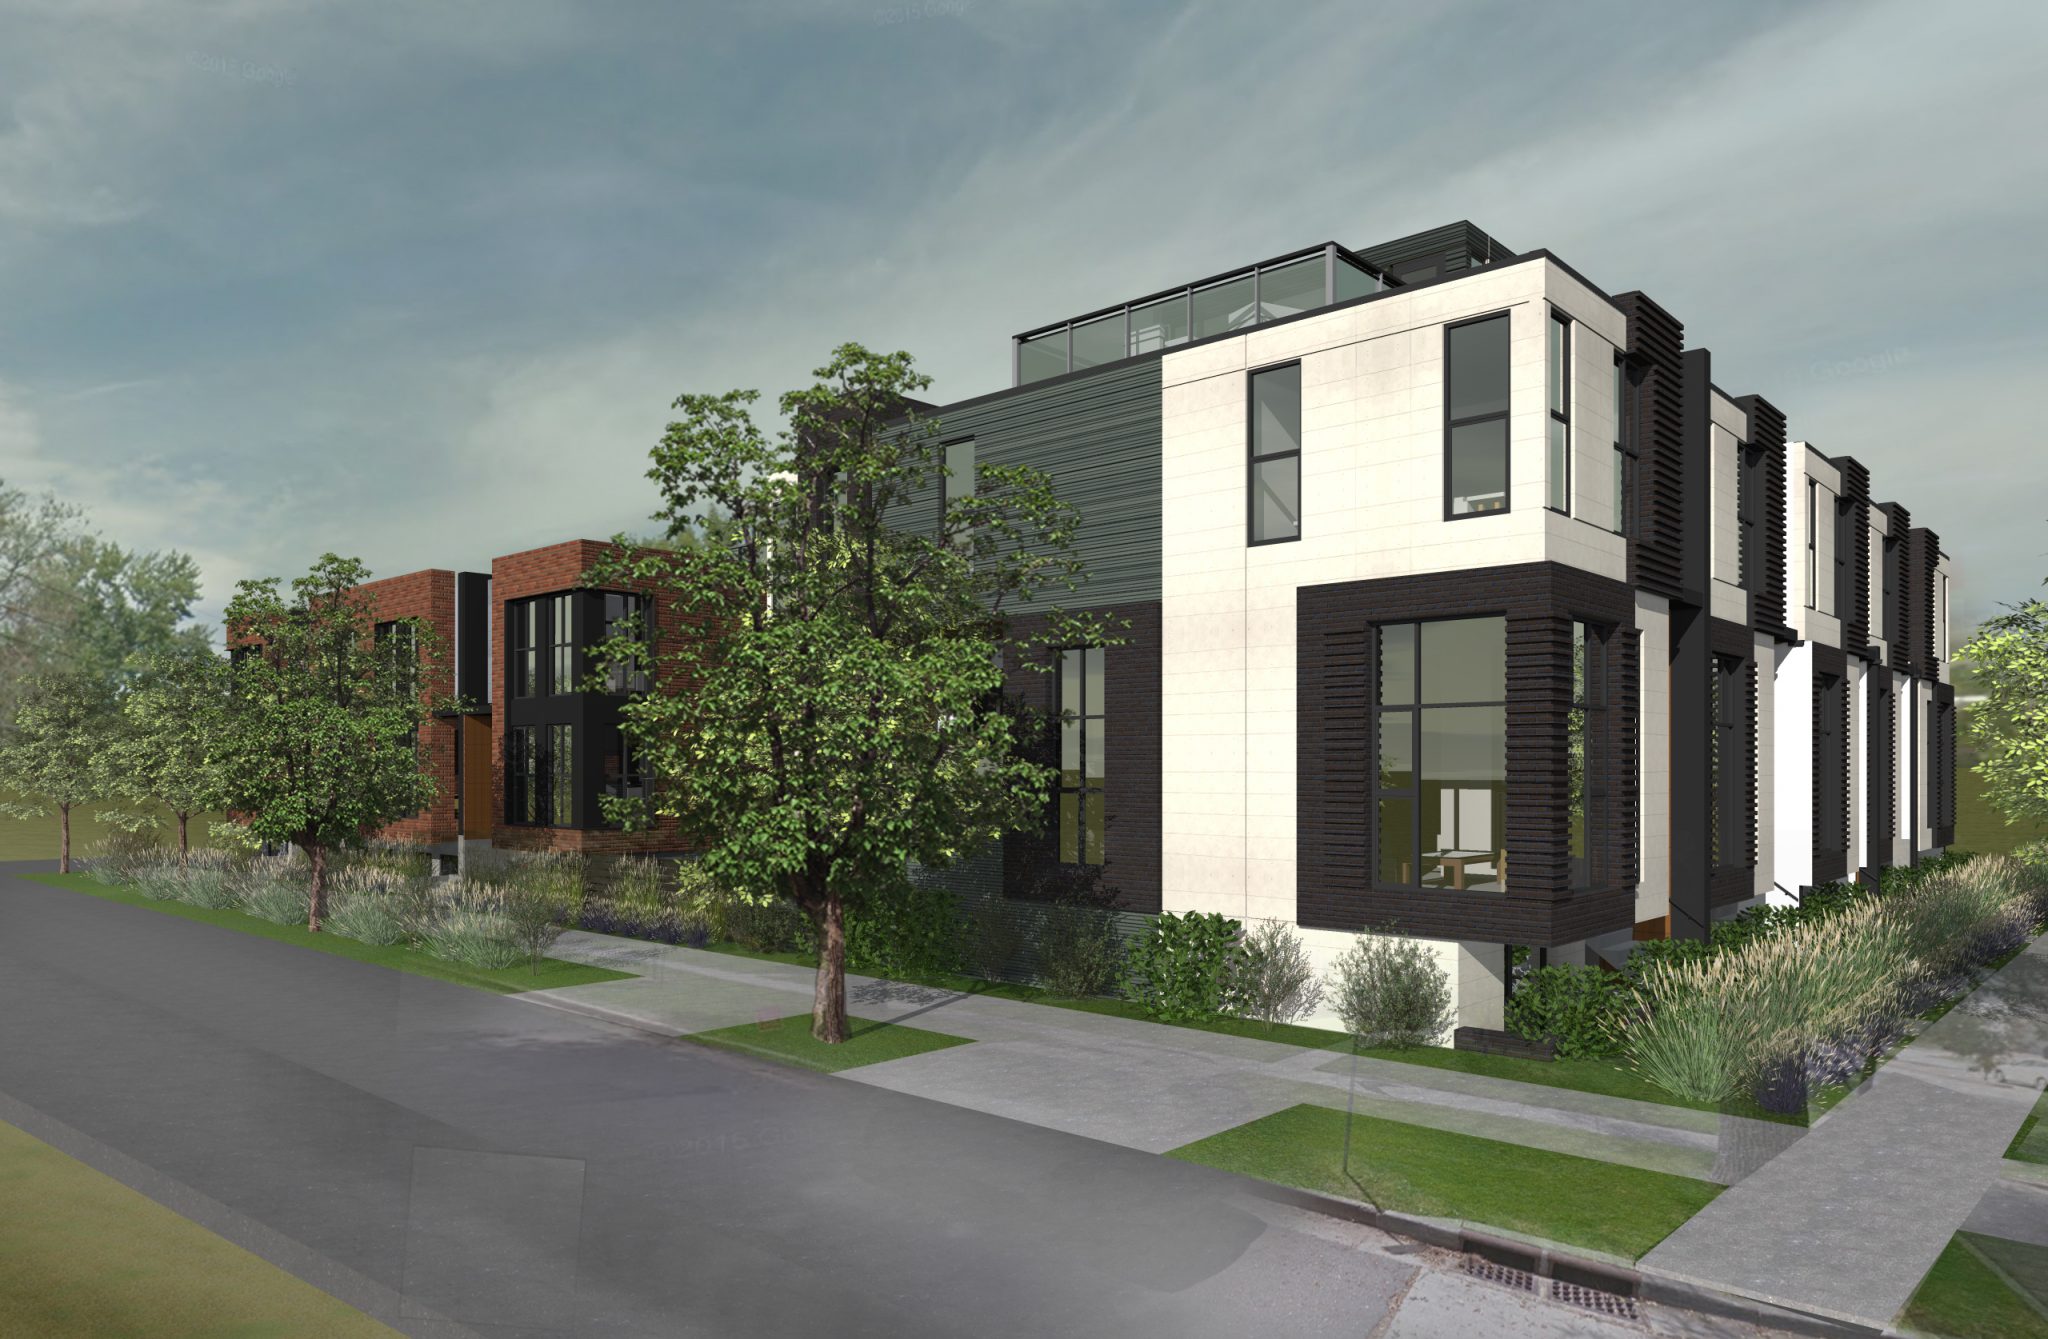 Evans and Milwaukee town homes - Residential